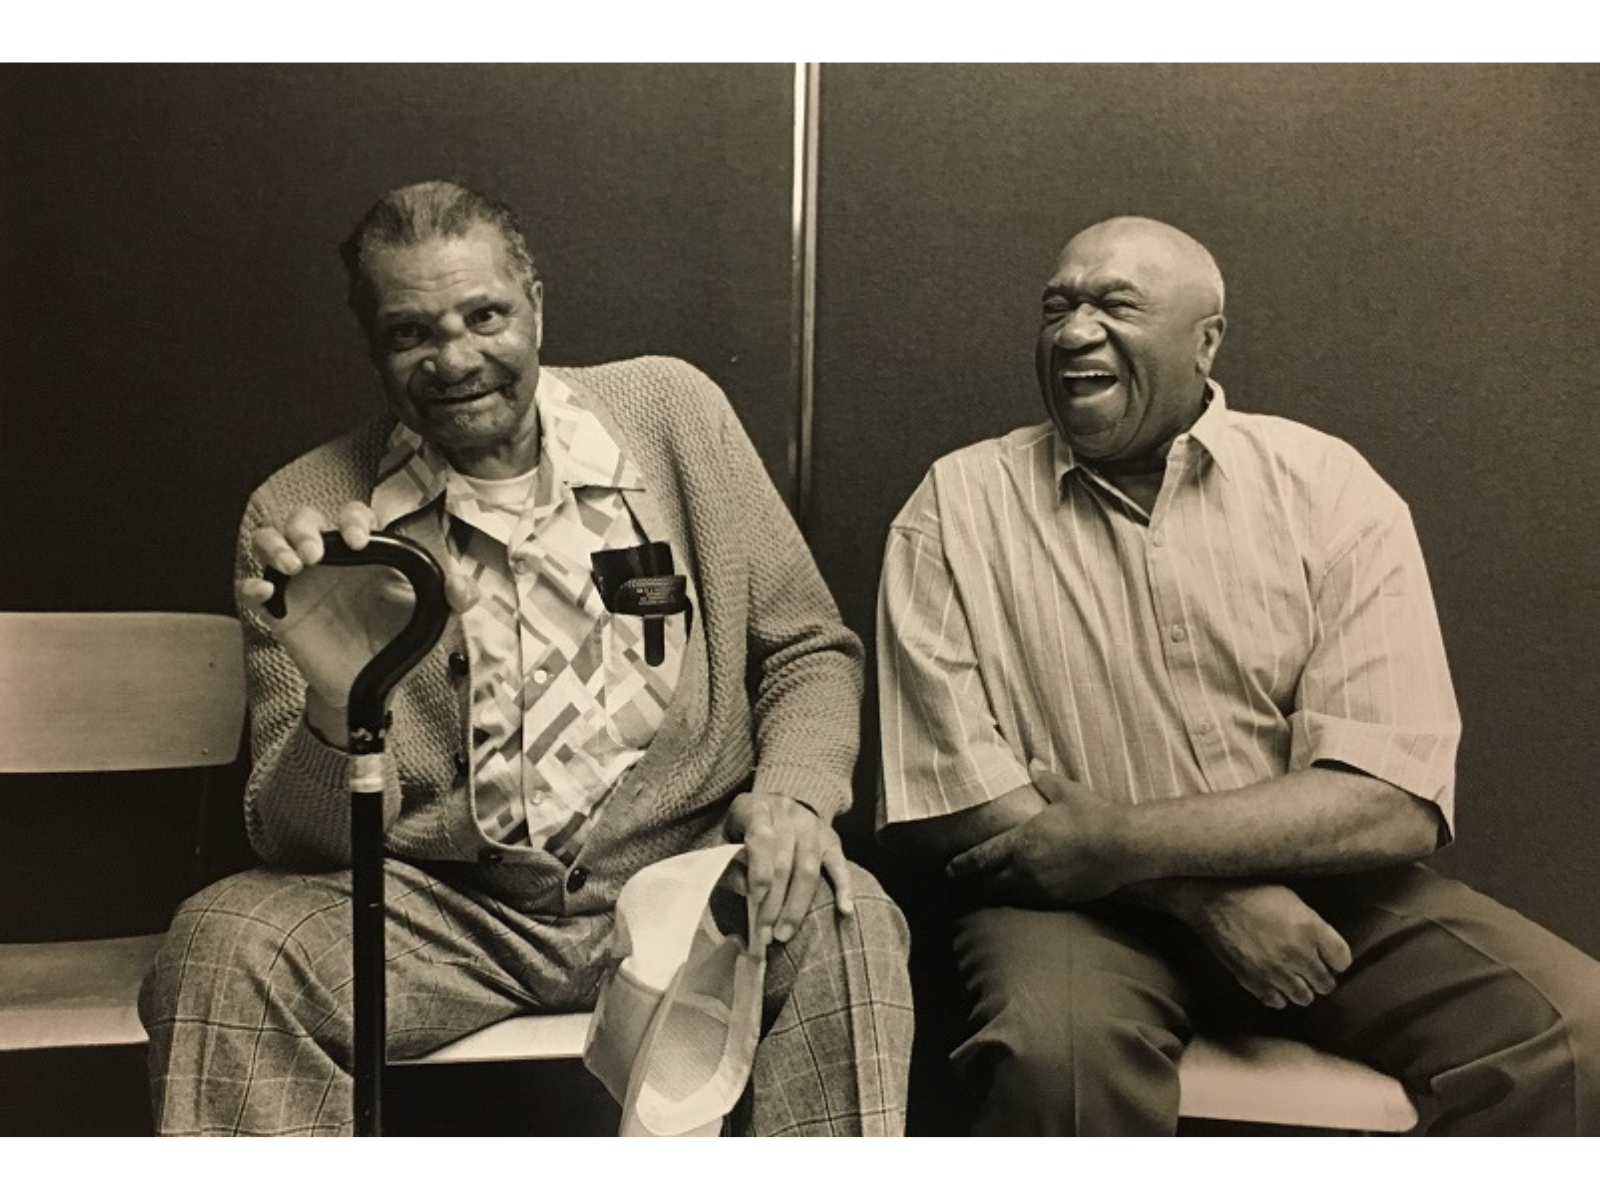 Two smiling Black men sitting together. One holds a walking cane.